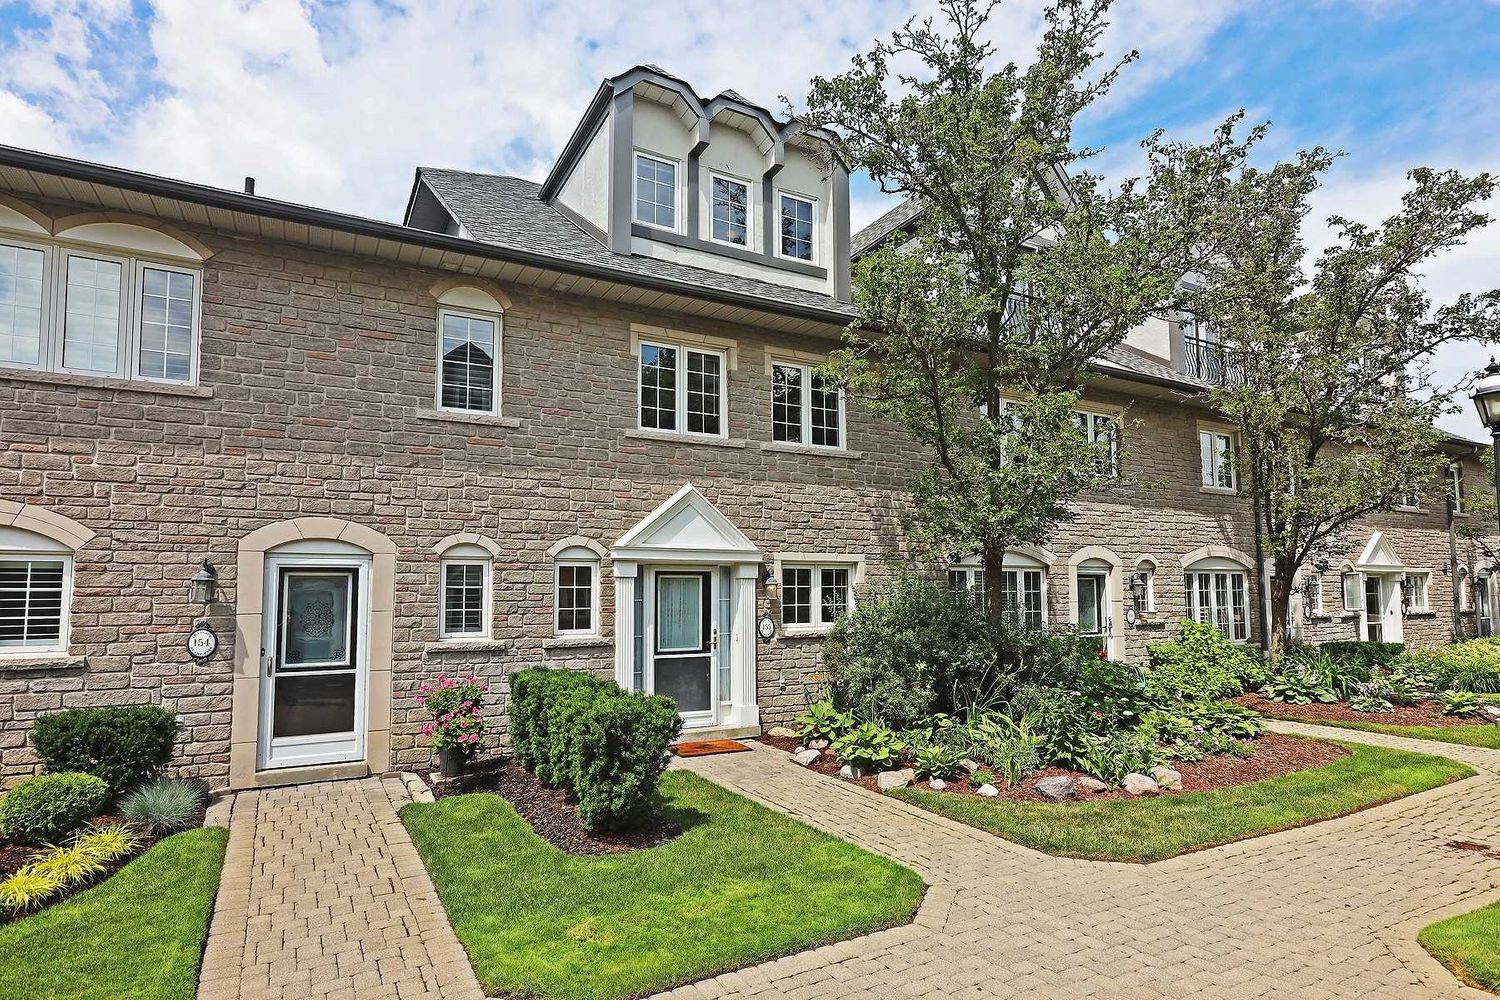 1995 Royal Road. Chateaux Townhomes is located in  Pickering, Toronto - image #1 of 2